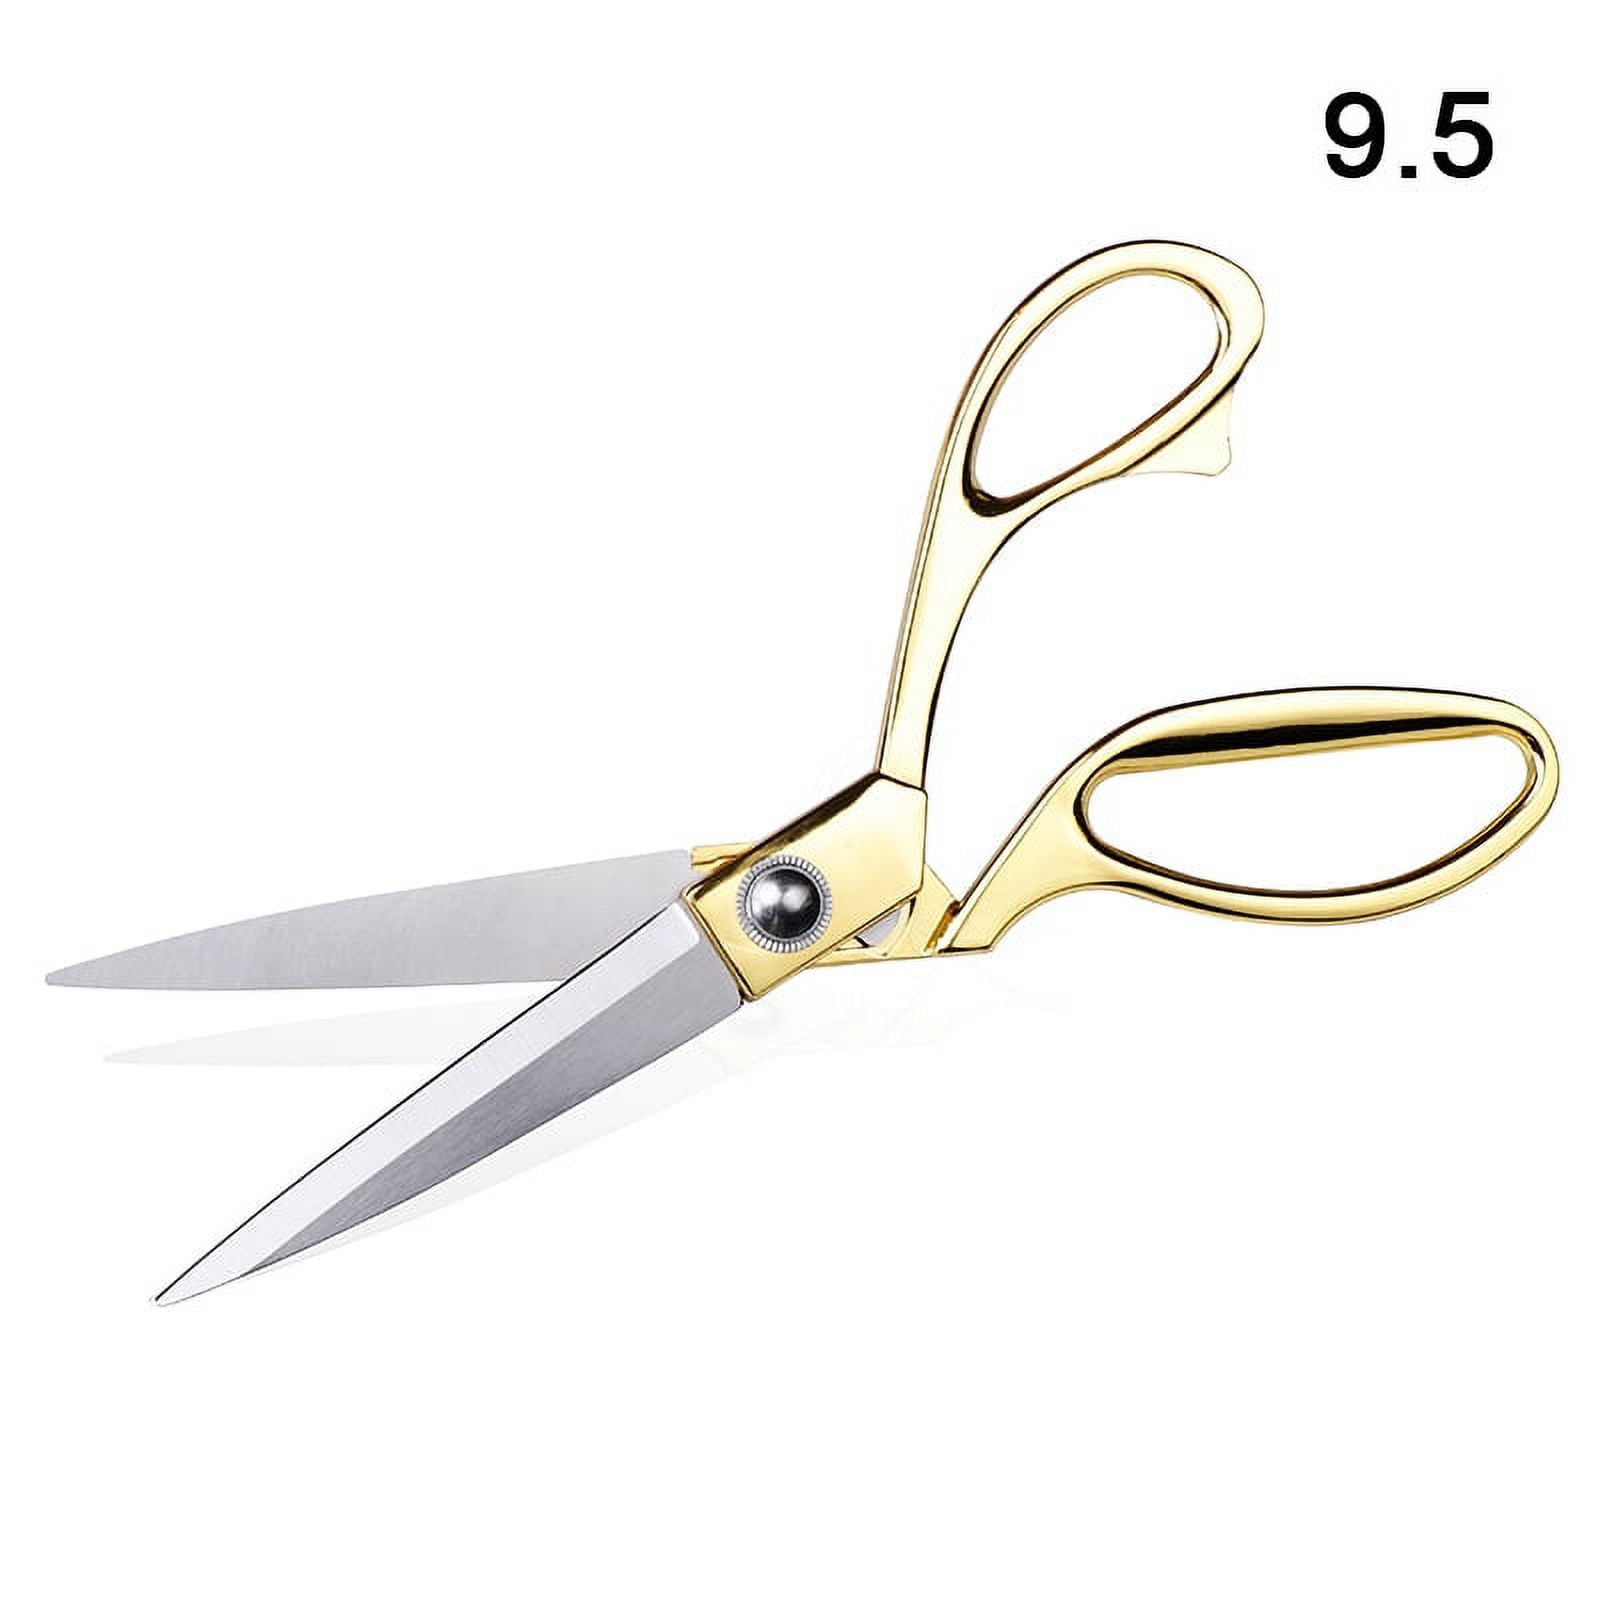 Handi Stitch Fabric Tailor Scissors and Thread Snipper – 10 inch Razor Sharp Stainless Steel for Sewing, Dressmaking & Knitting Needs – Durable